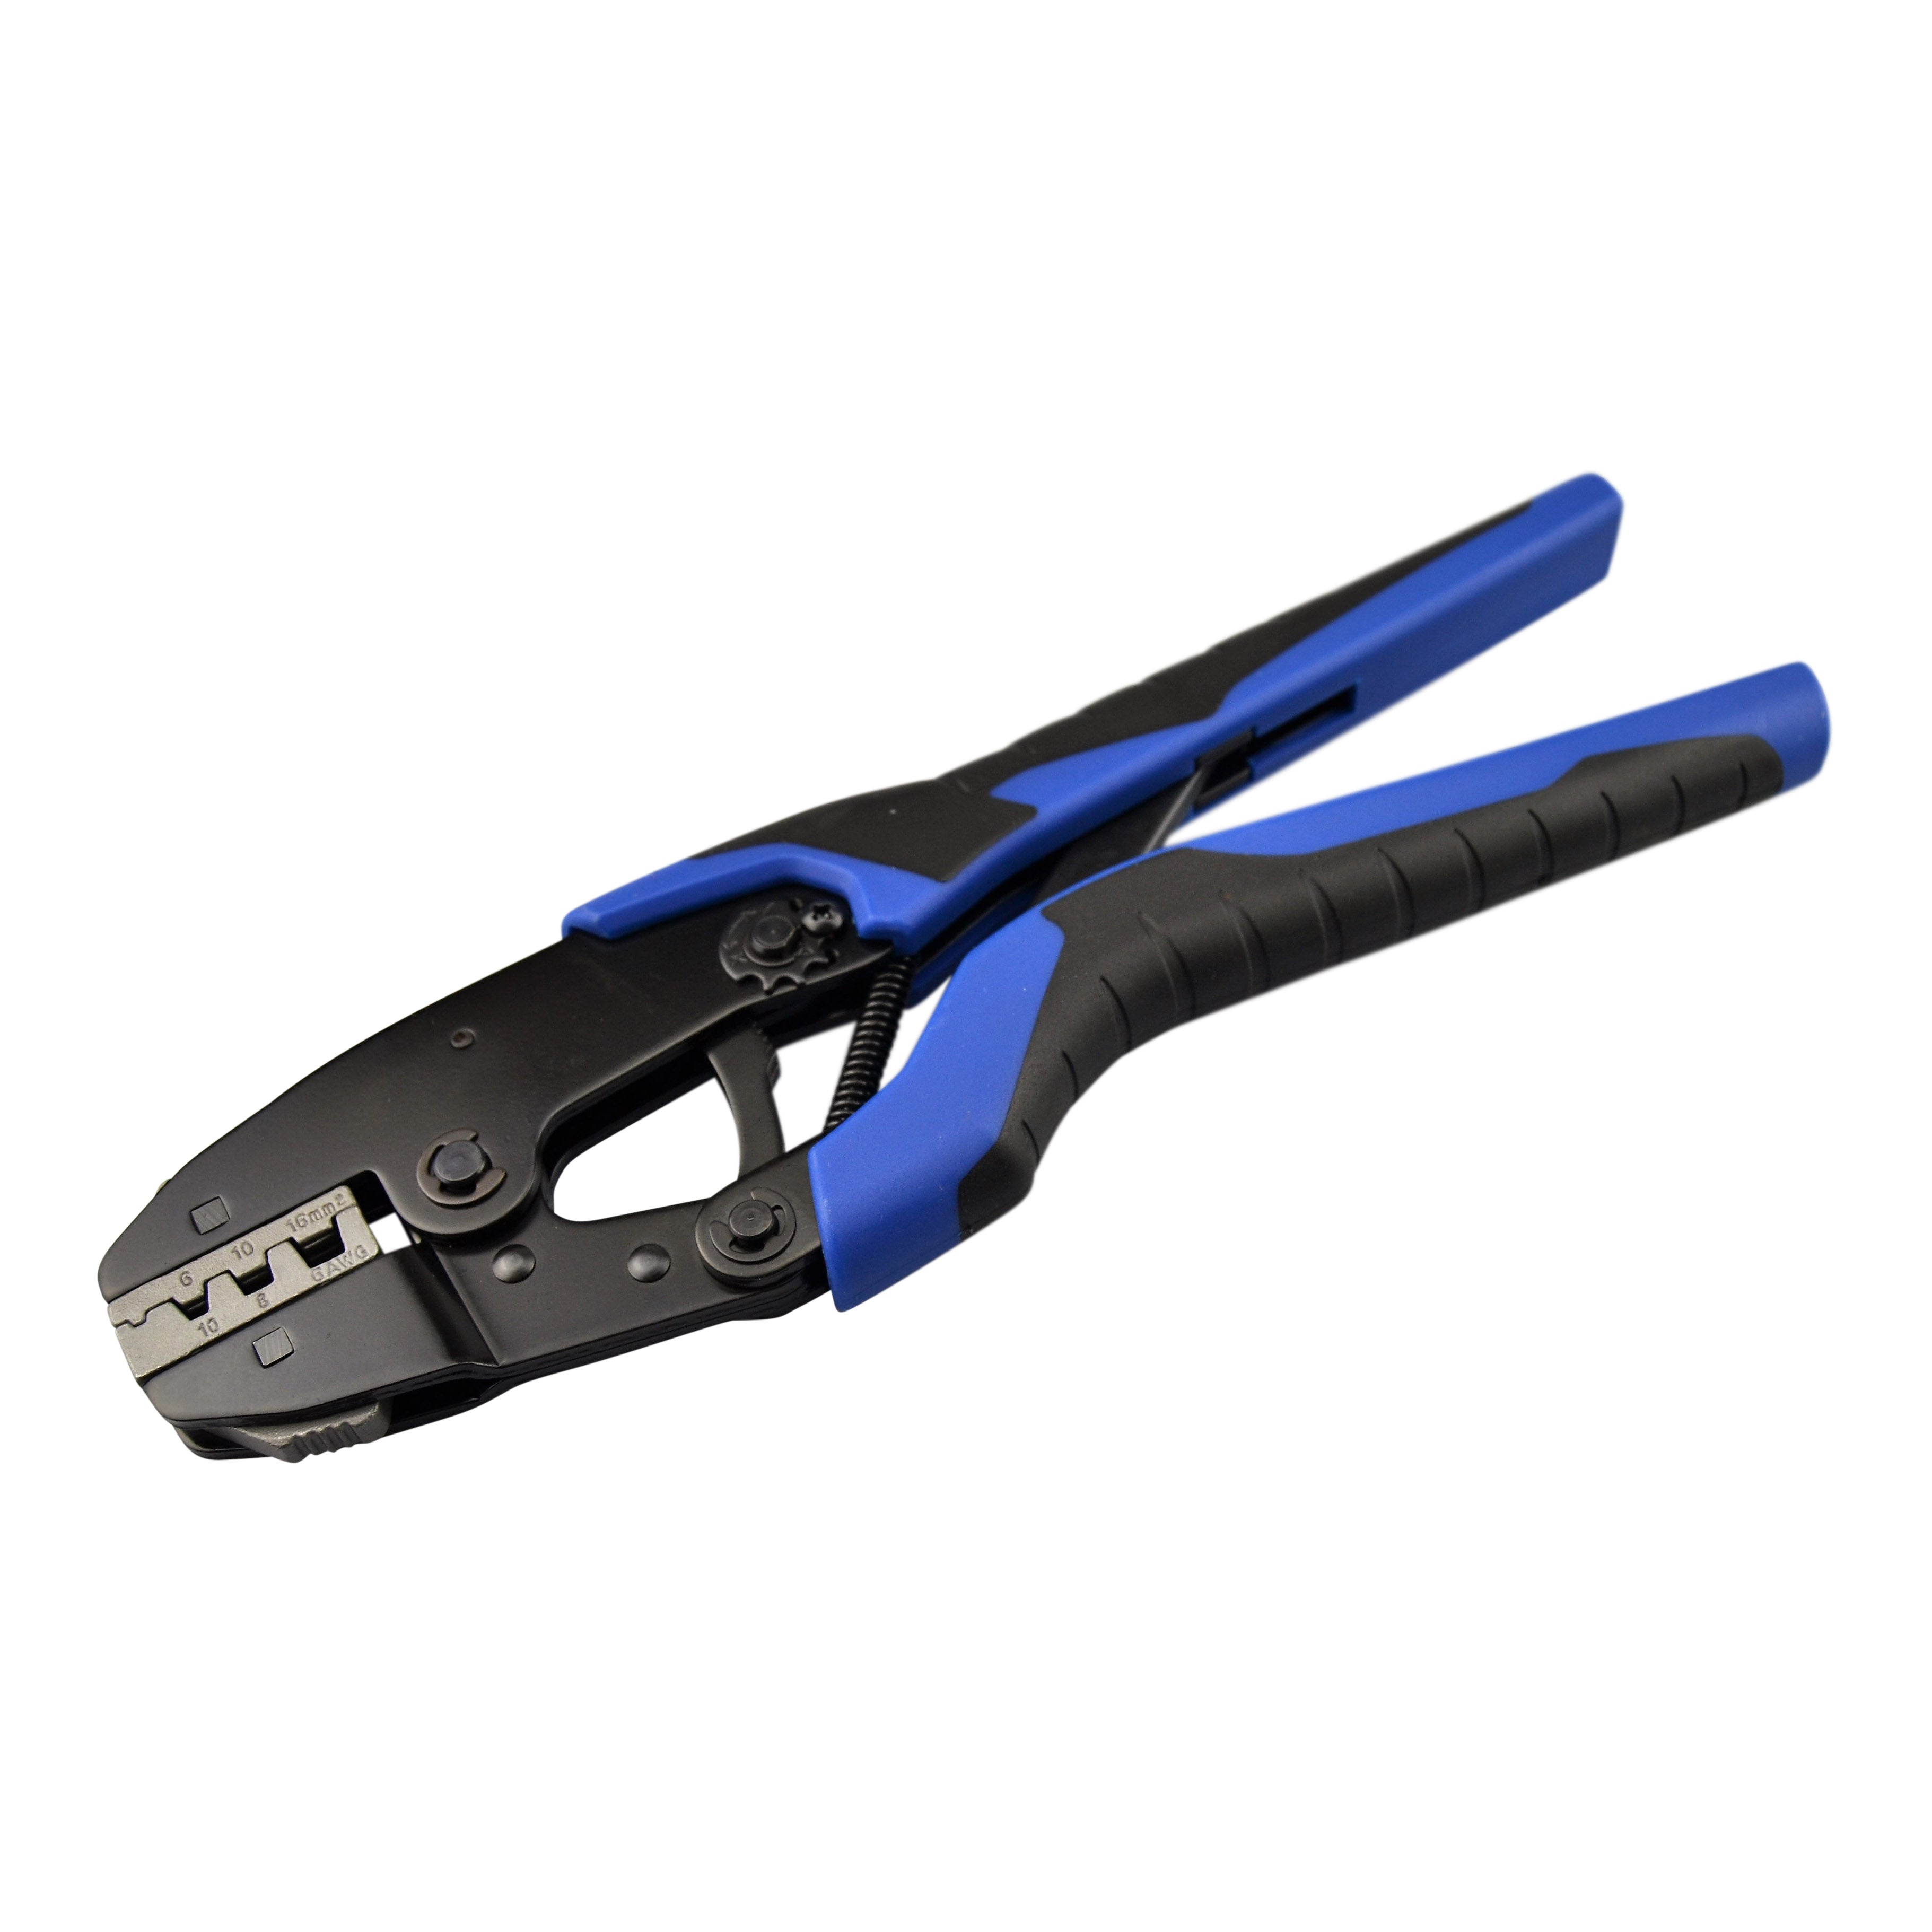 Ratchet Crimping Tool For Single, Dual Entry & Uninsulated Cord End Terminals 4.0-16mm²